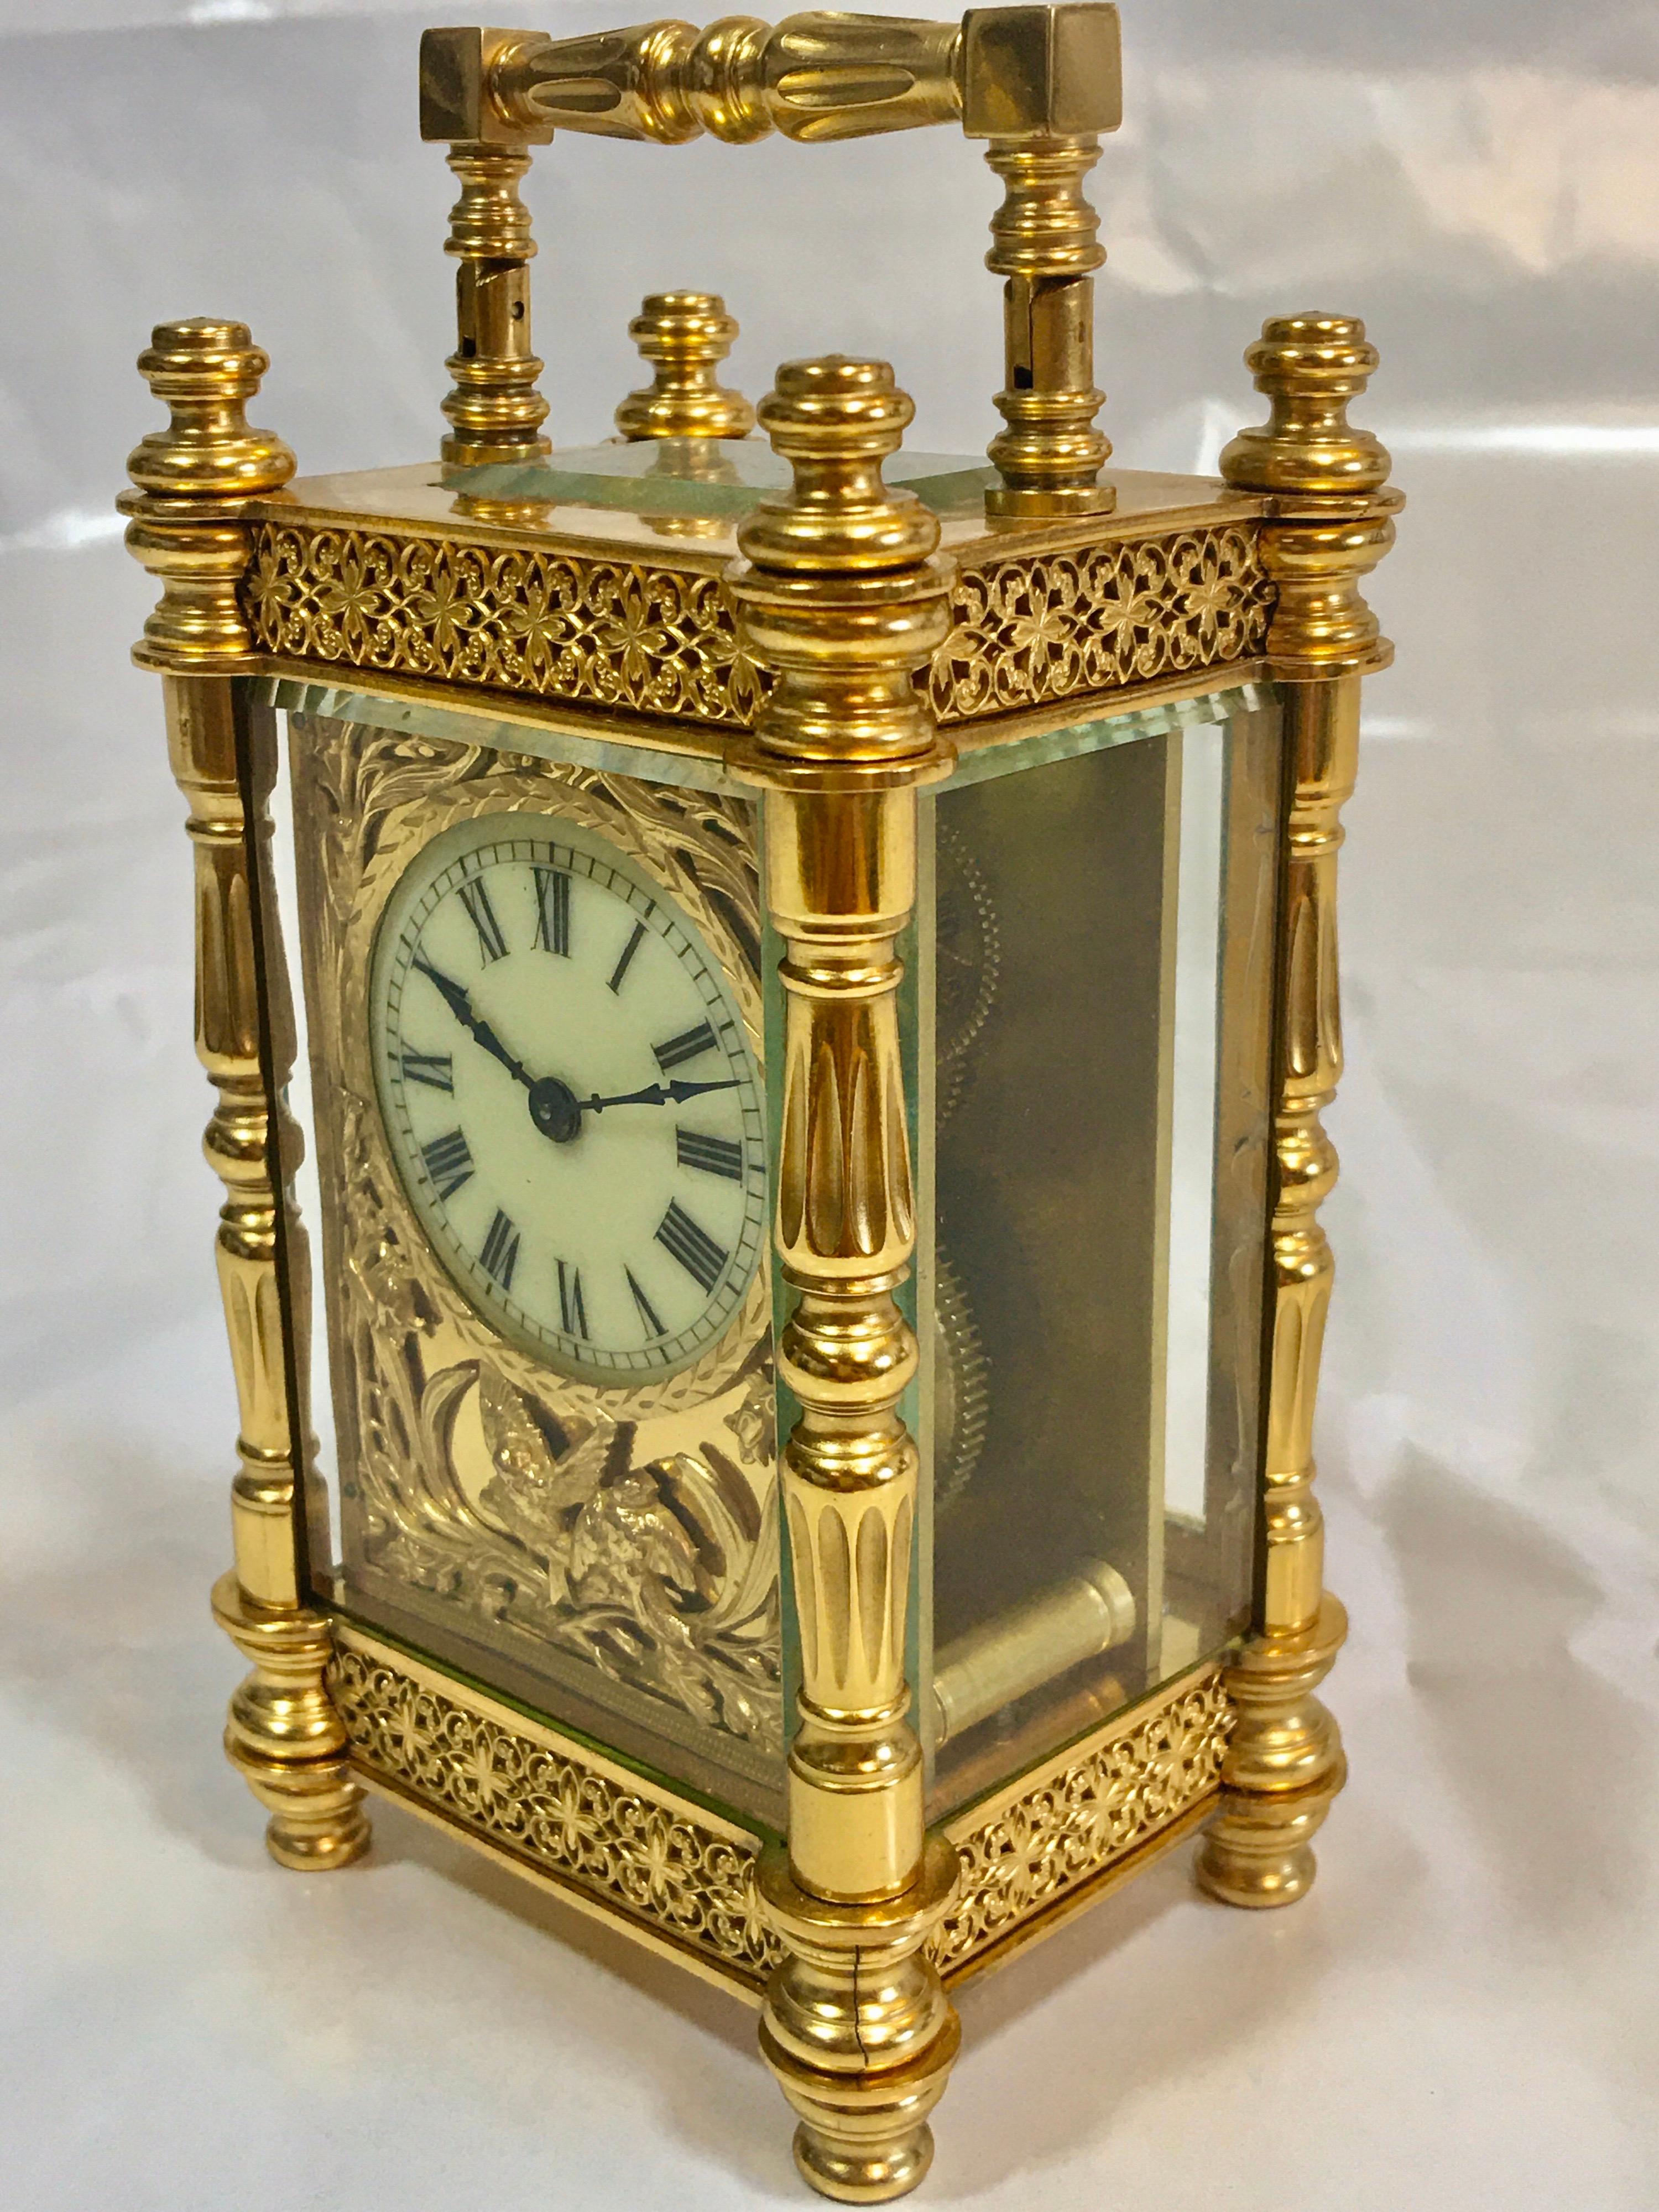 This beautiful French decorative timepiece carriage clock is in good working condition and it is ticking well. Visible signs of ageing and wear as shown.

Please study the images carefully as form part of the description.